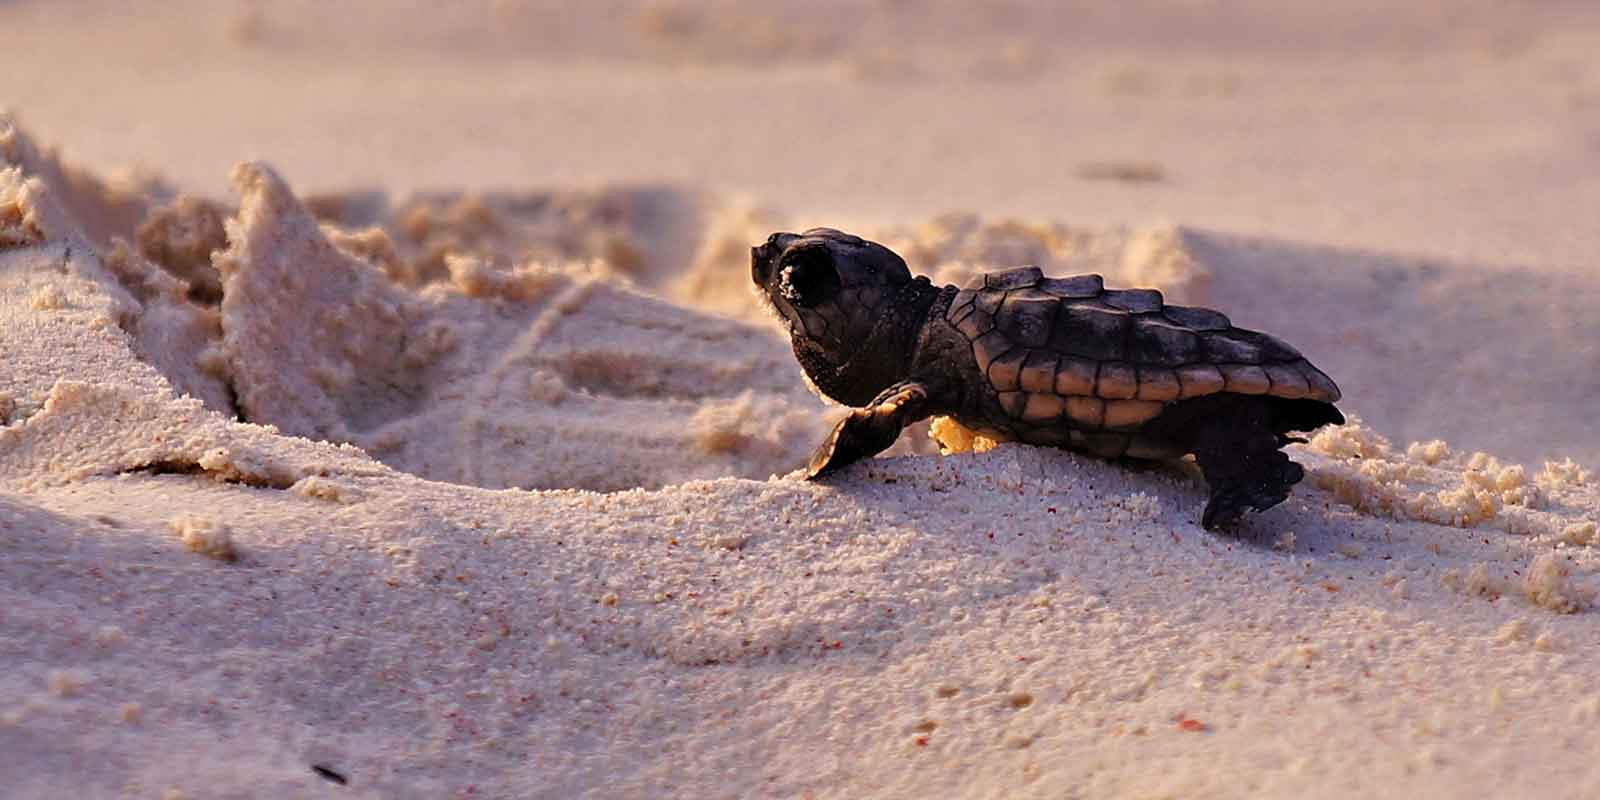 Newly hatched sea turtle on its way across the beach to the sea